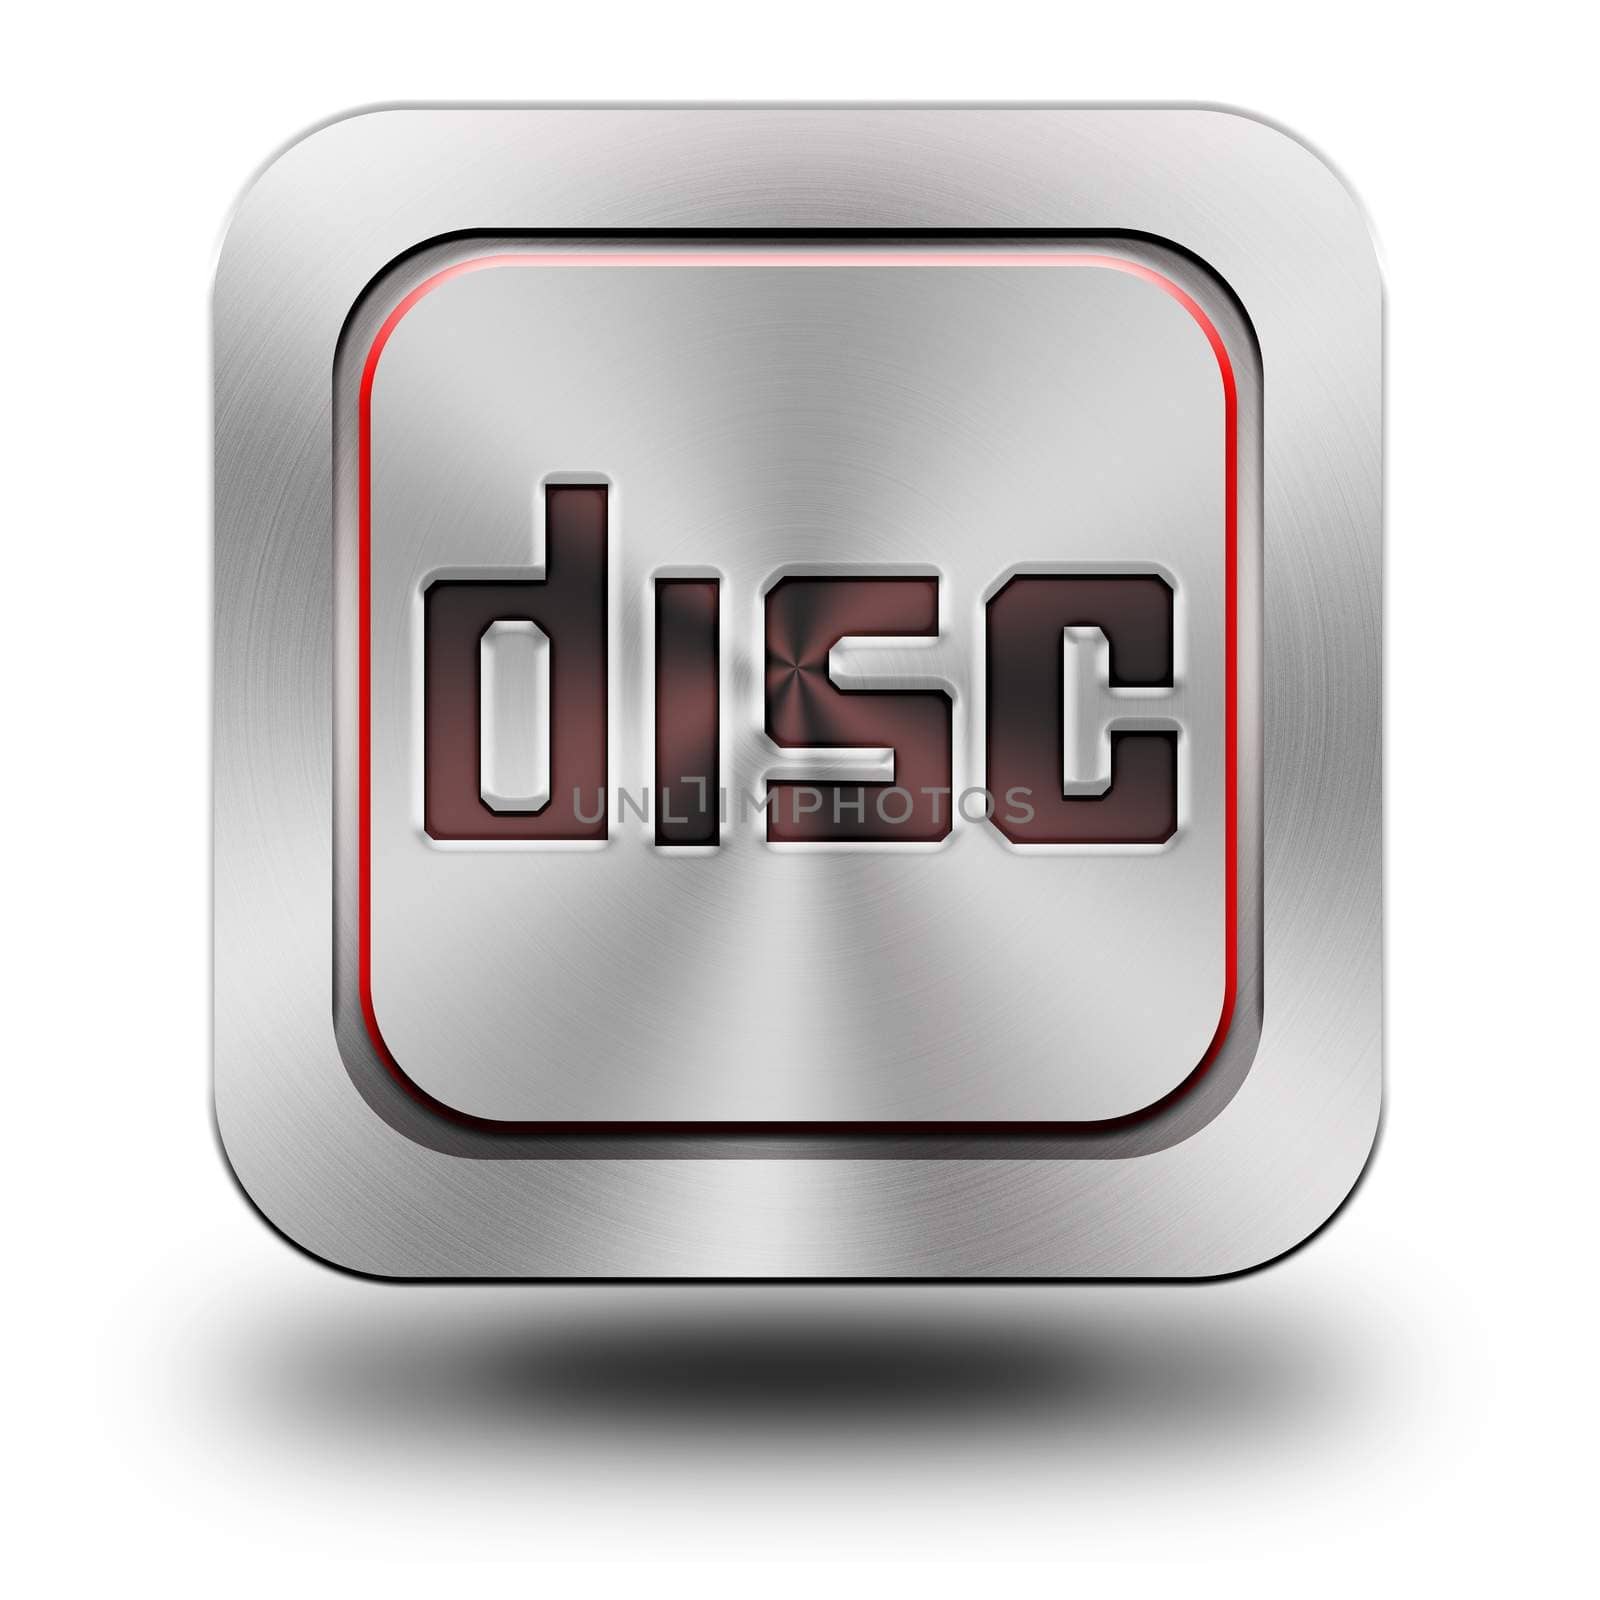 Disc, aluminum, steel, chromium, glossy, icon, button, sign, icons, buttons, crazy colors